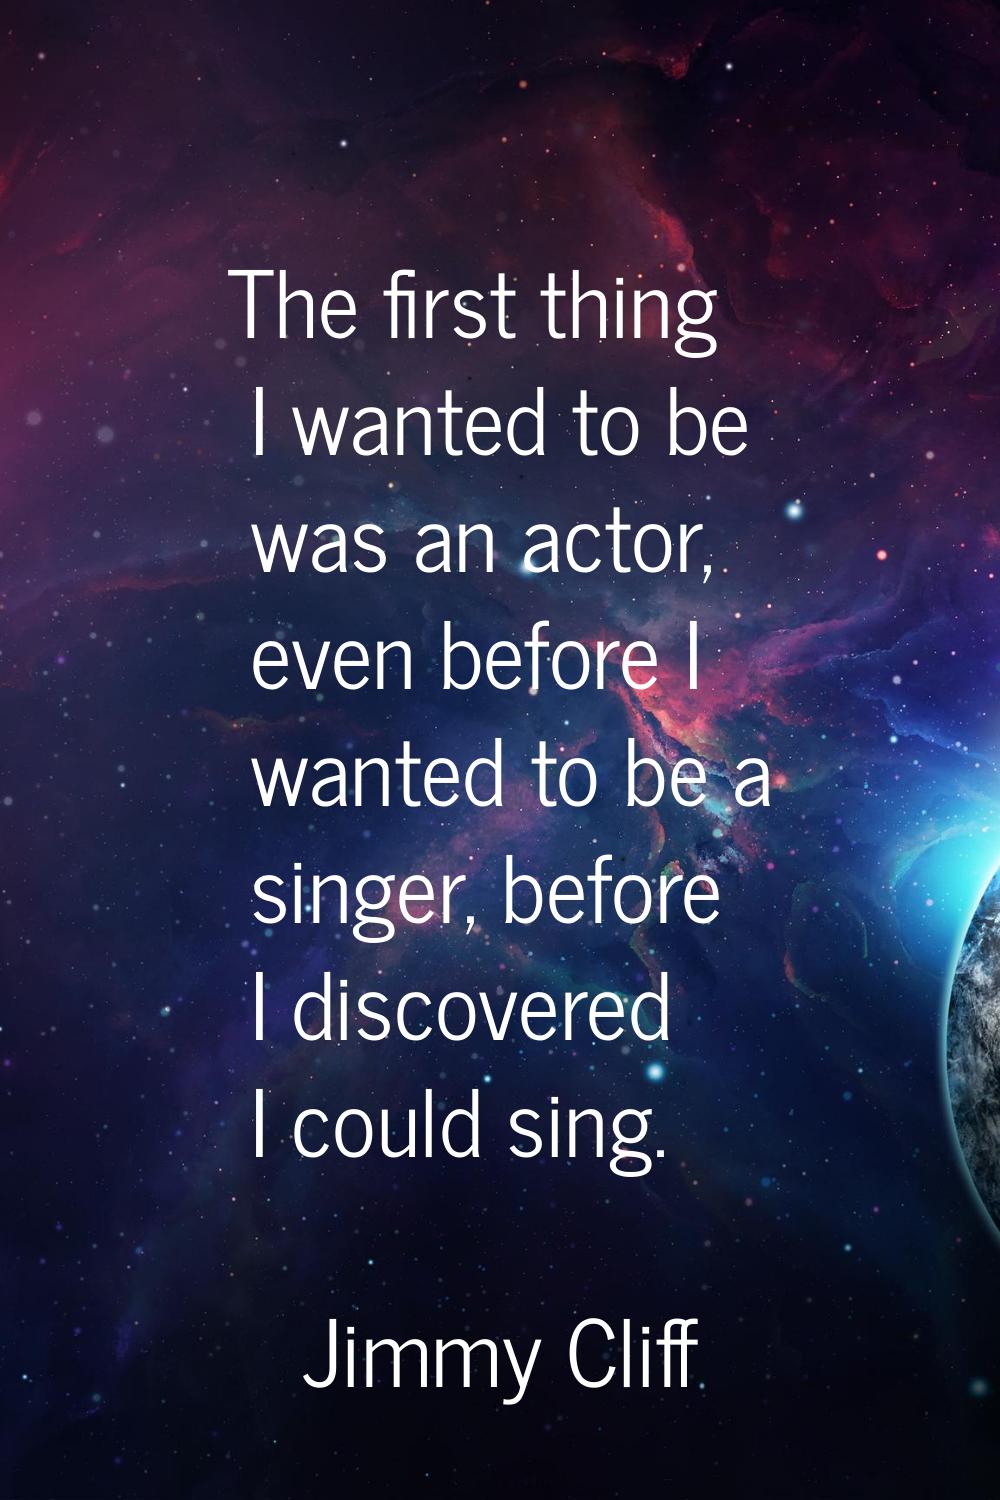 The first thing I wanted to be was an actor, even before I wanted to be a singer, before I discover